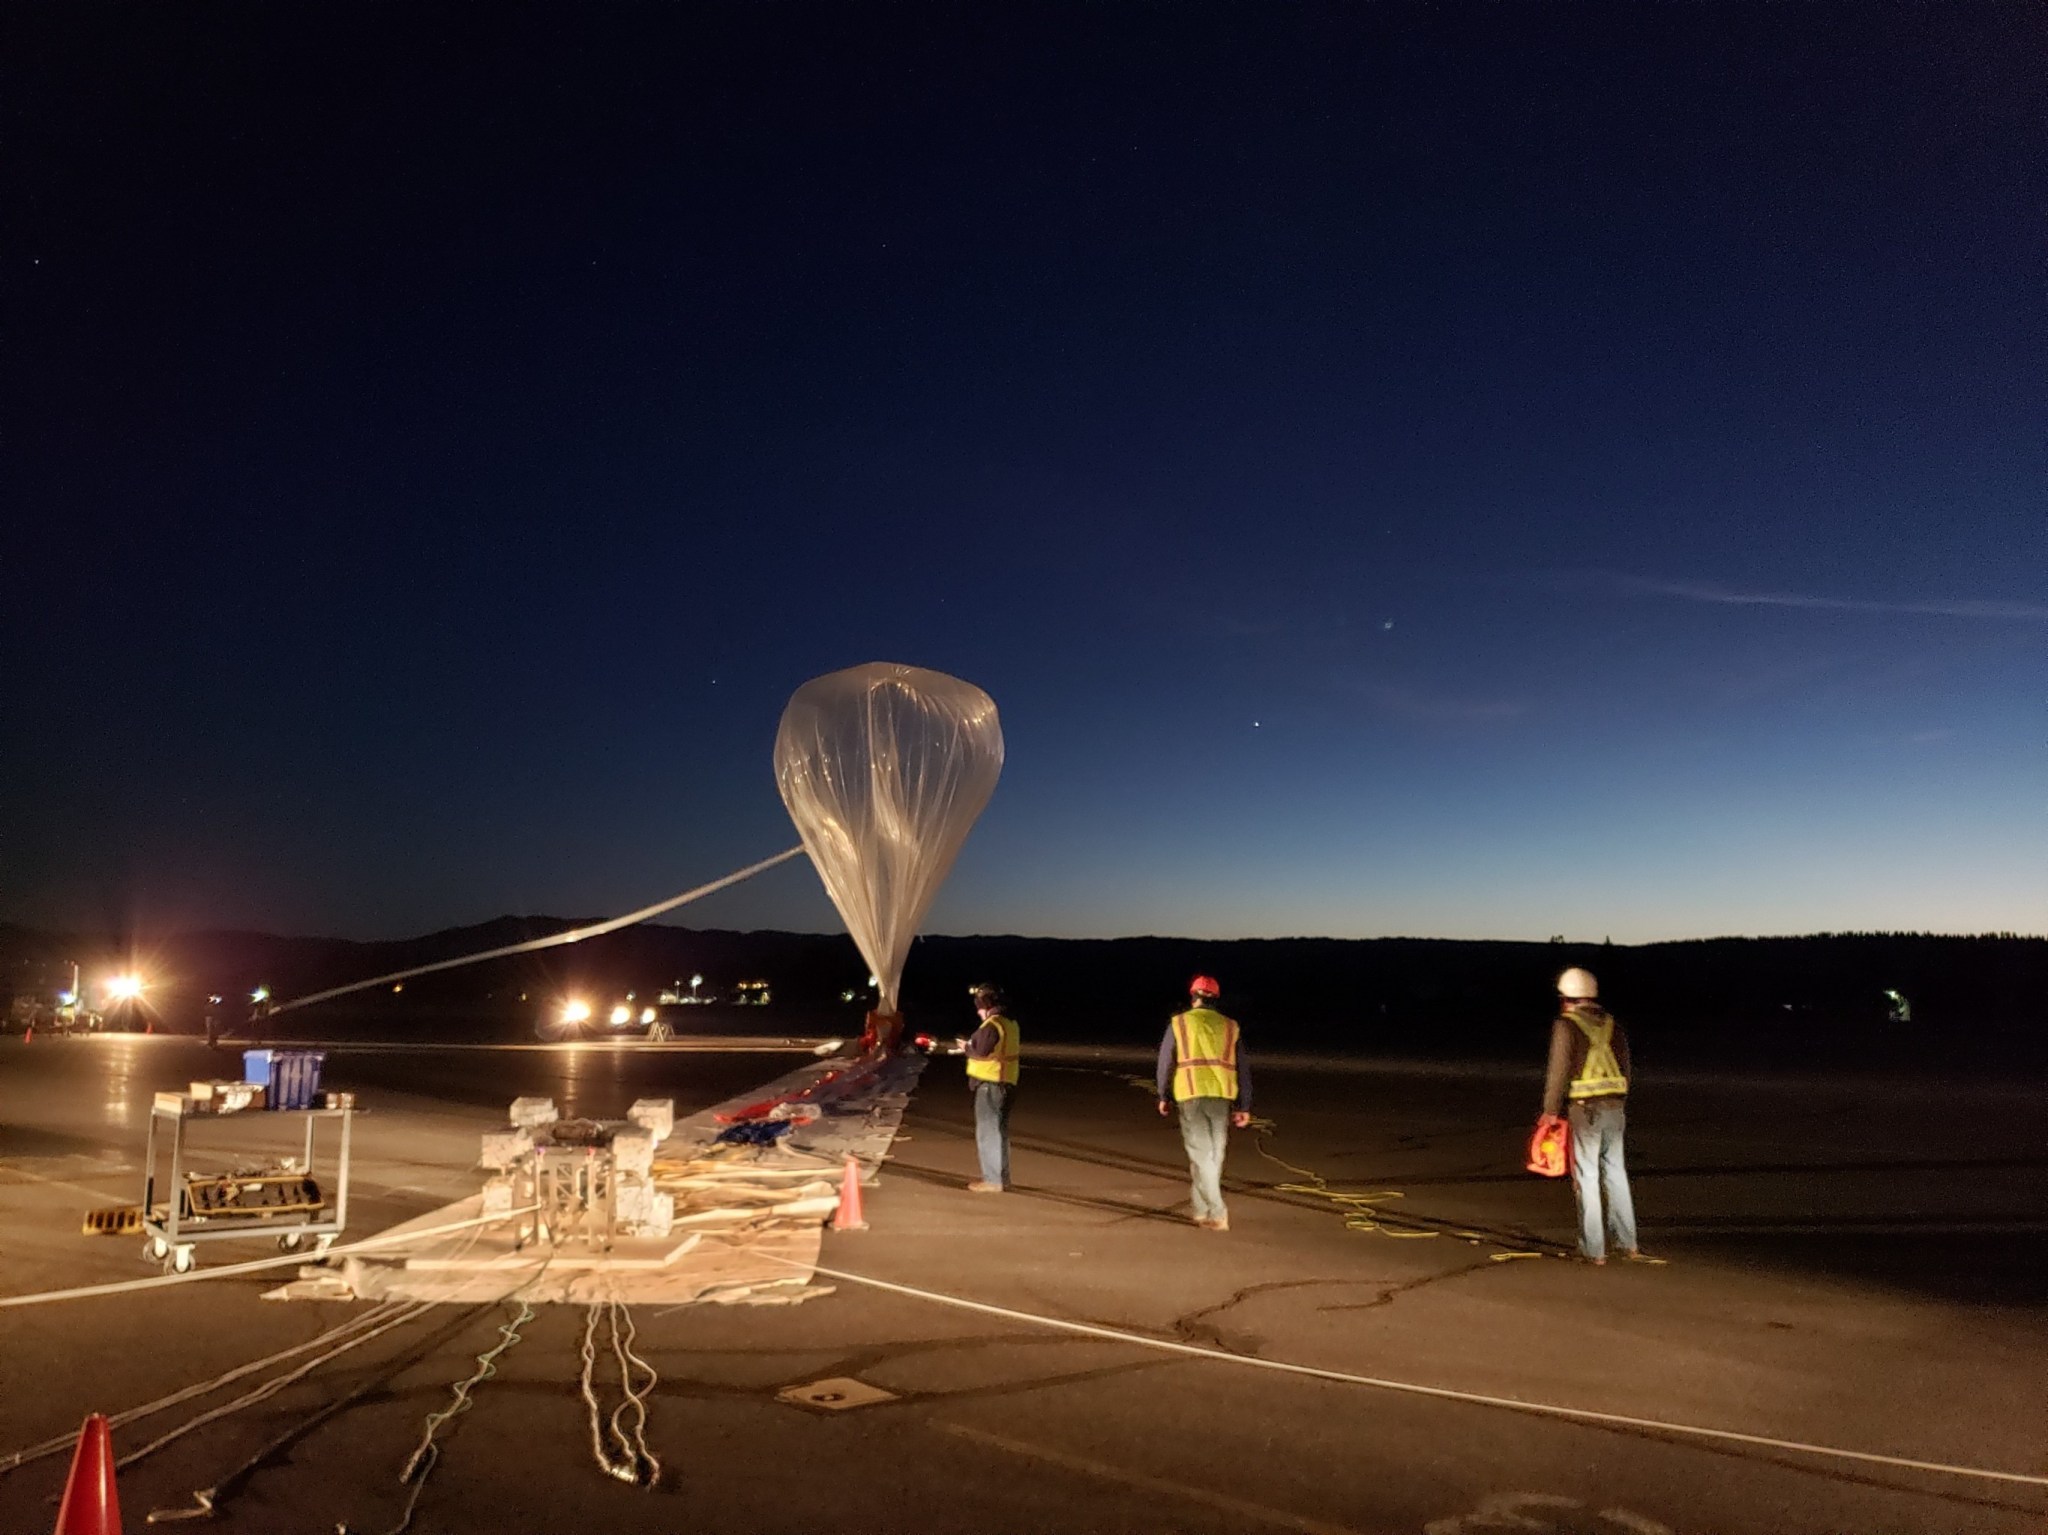 World View and NASA team prepares to launch World View’s Stratollite balloon system.